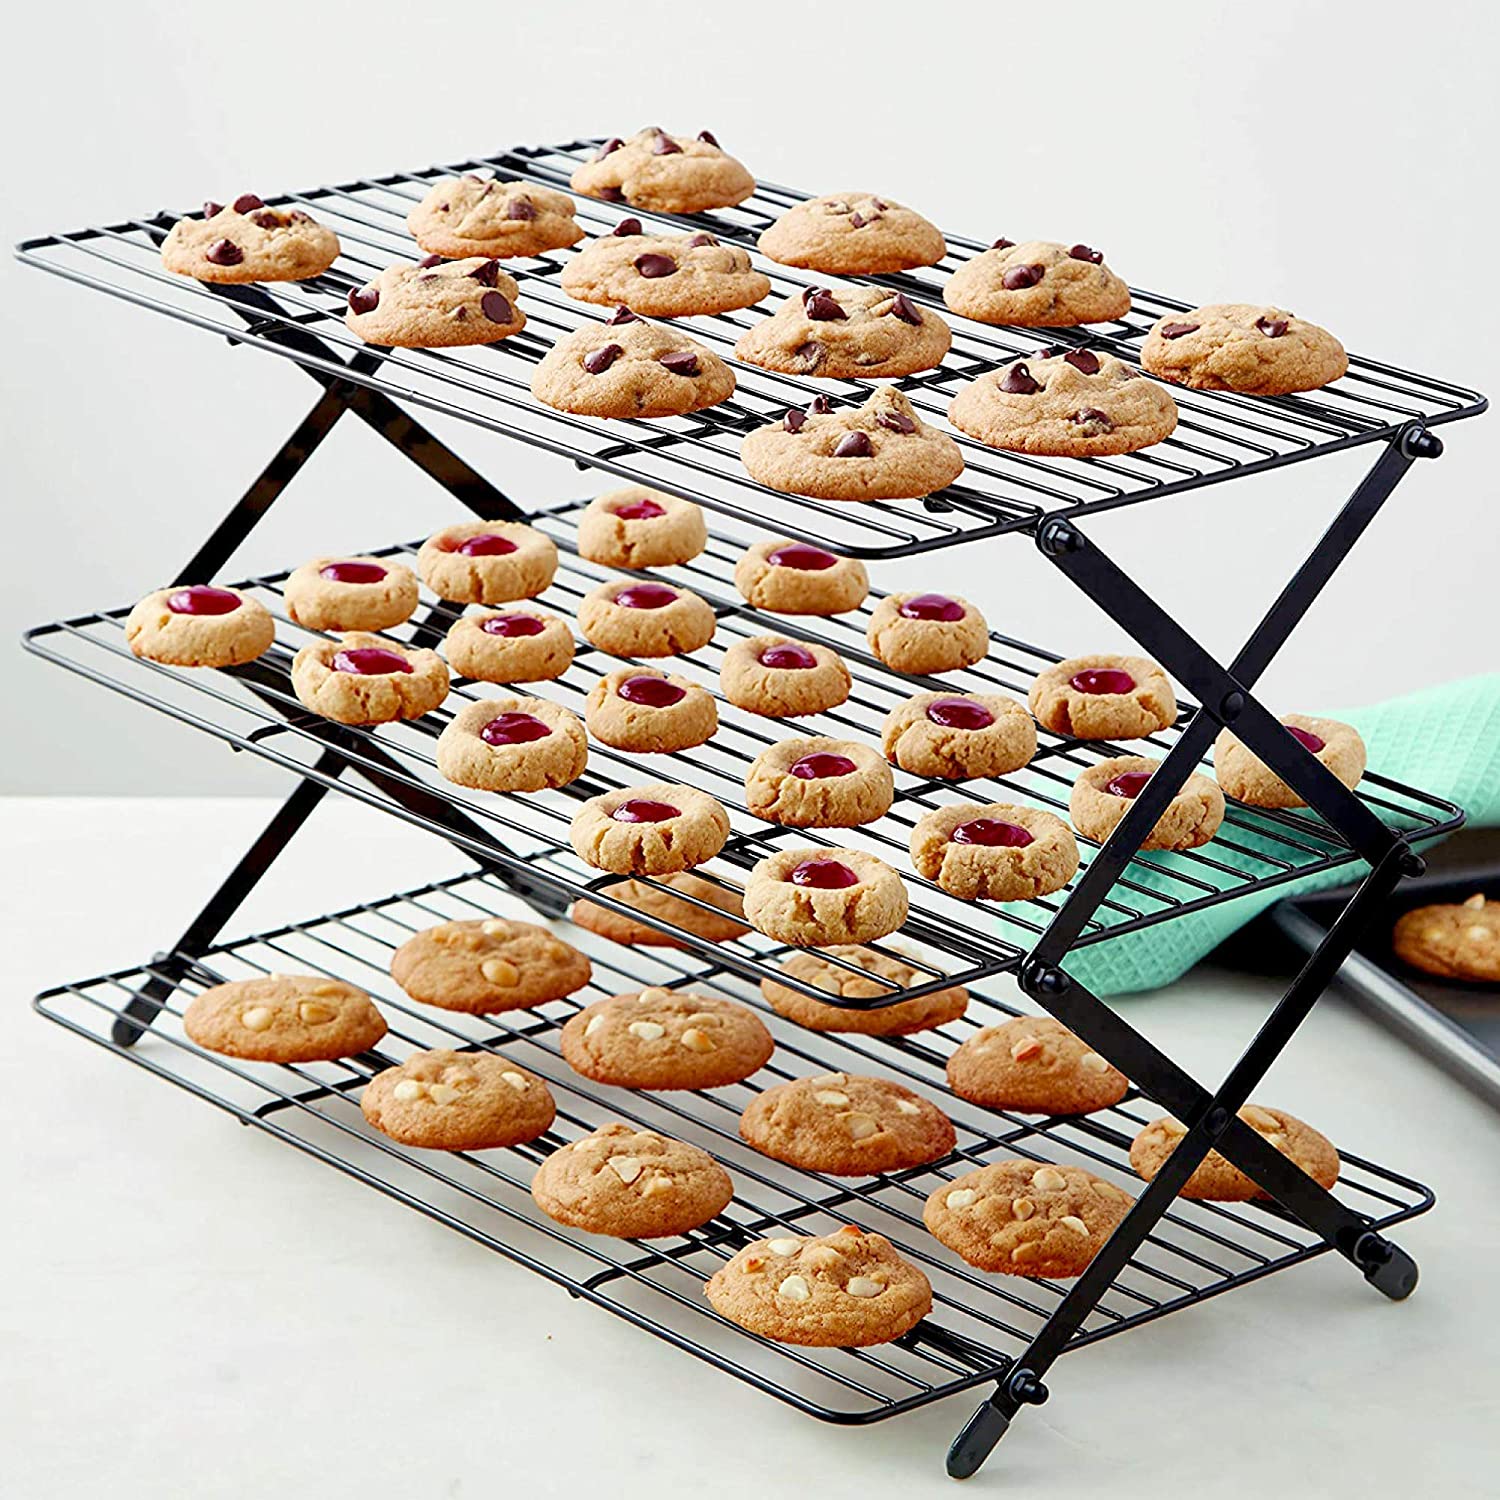 Kitchenatics Jelly Roll Baking Pan with Raised Rack for Baking & Roasting